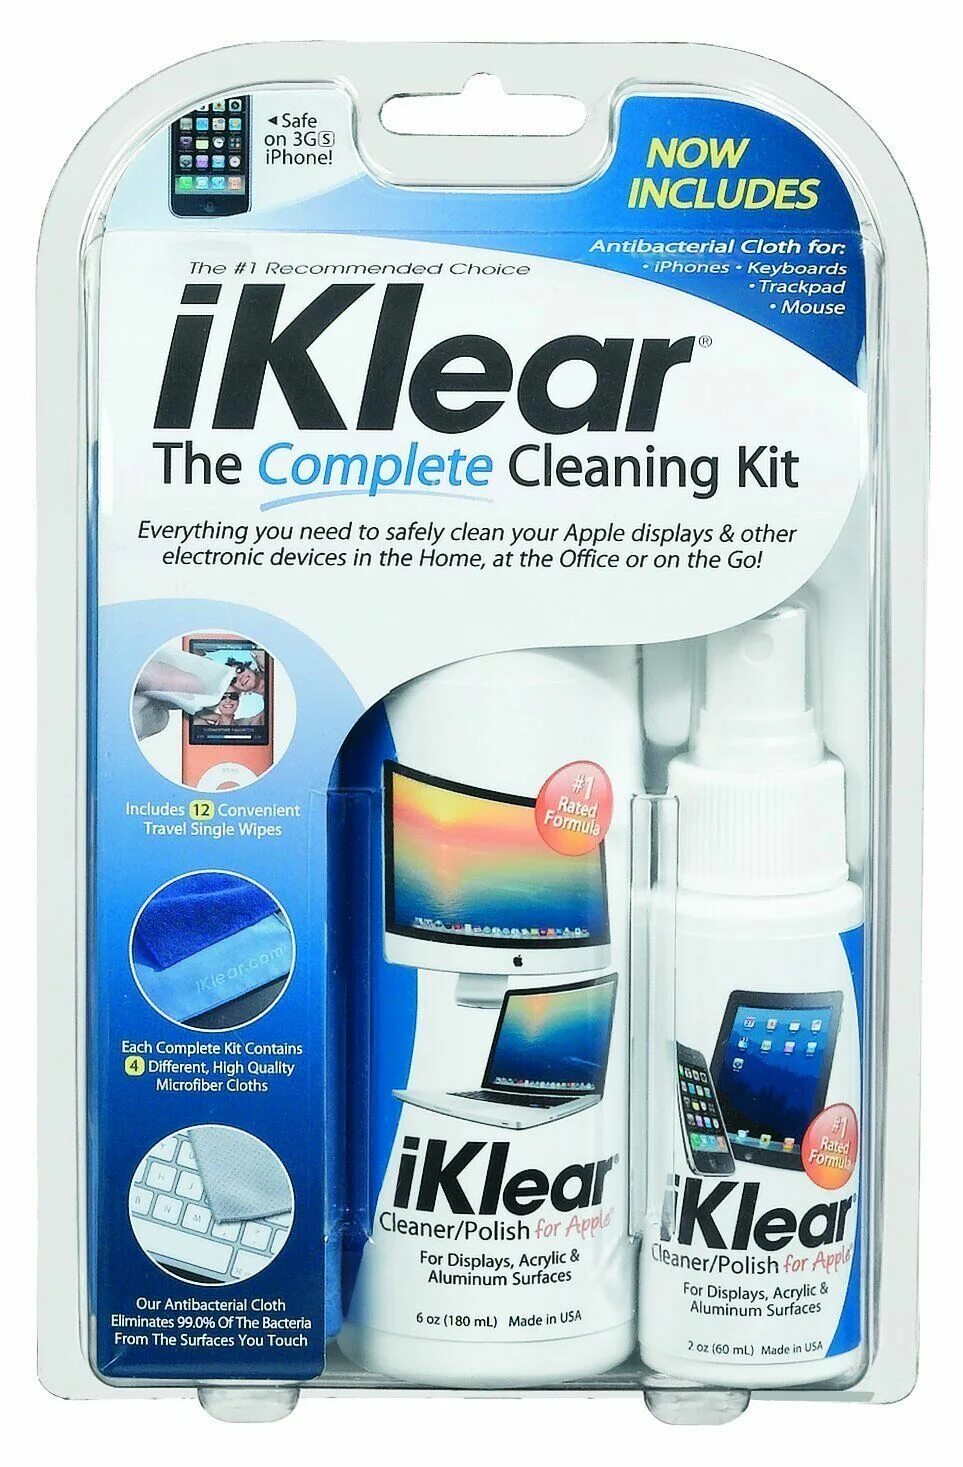 Cleaning completed. Средство Screen Cleaning Kit. Complete Cleaning. 2k Klear.